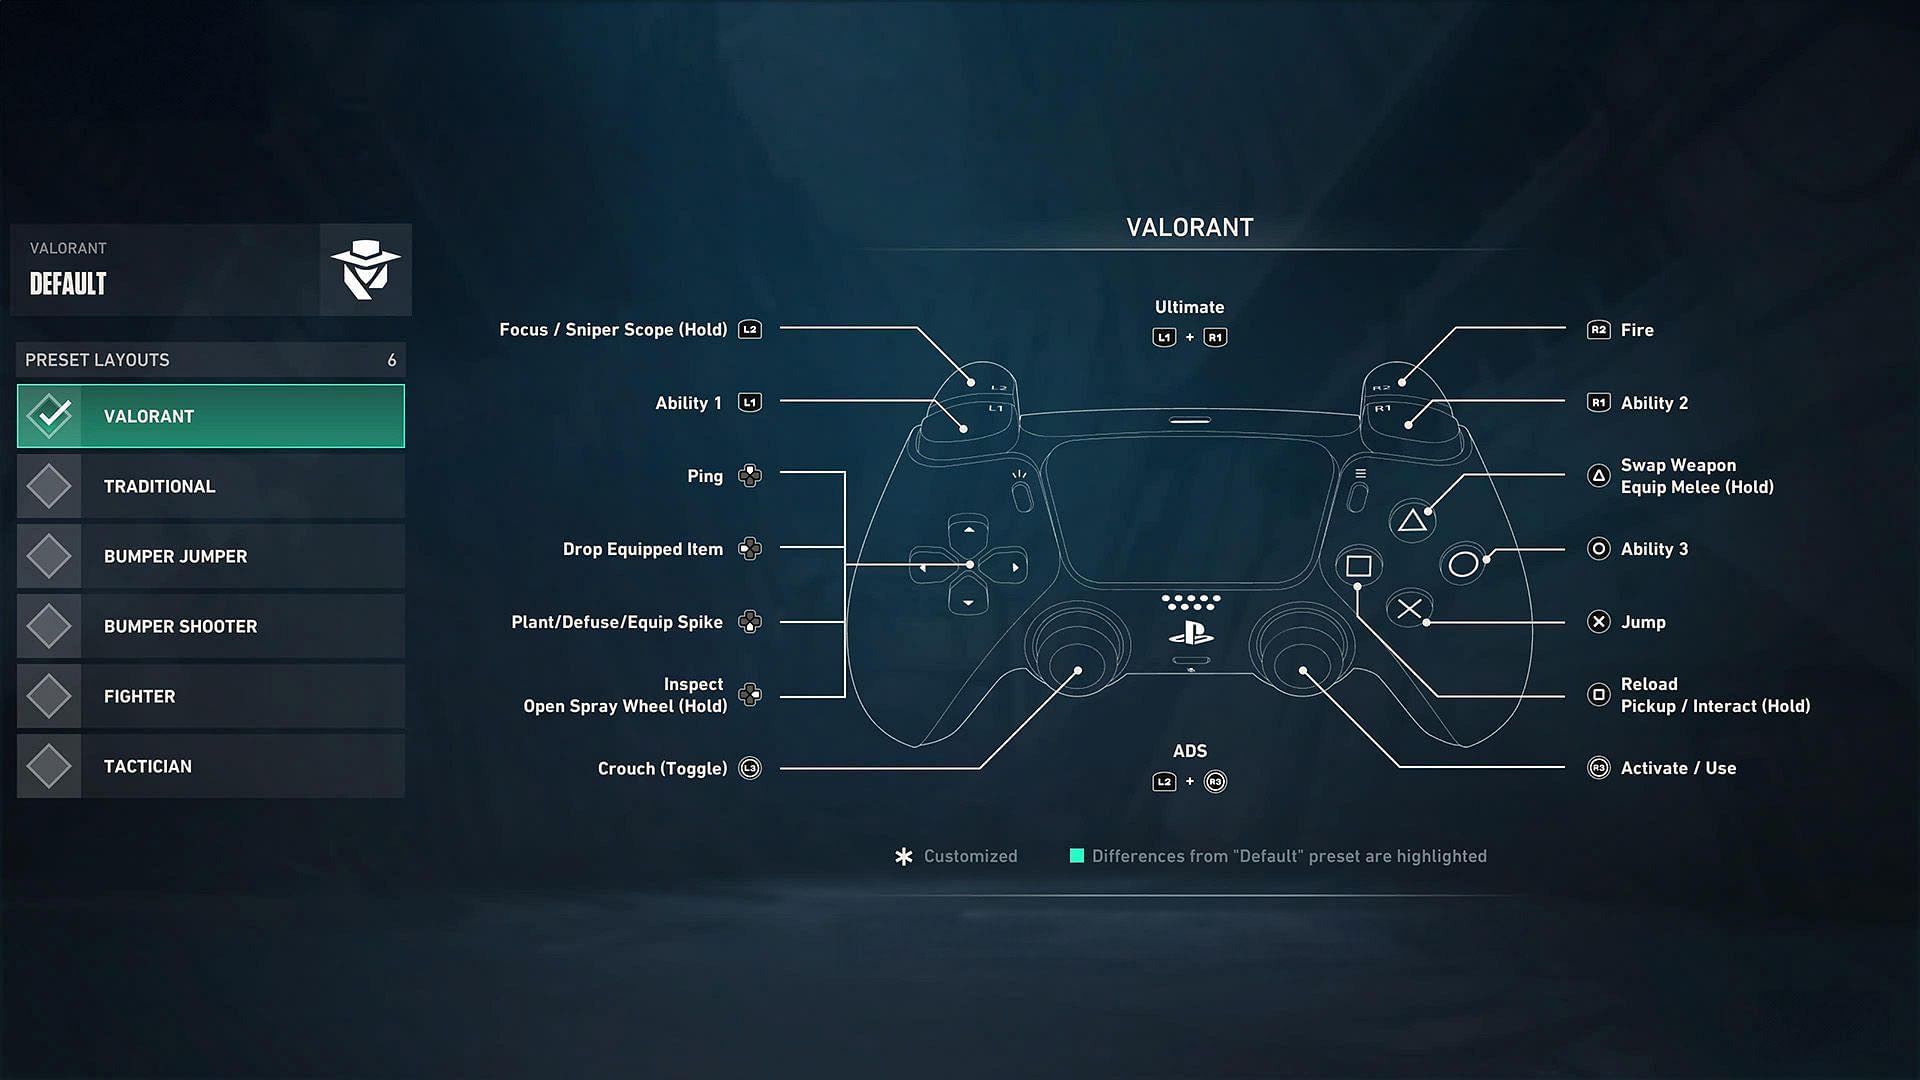 PS5 controllers - Valorant (Image via Riot Games)